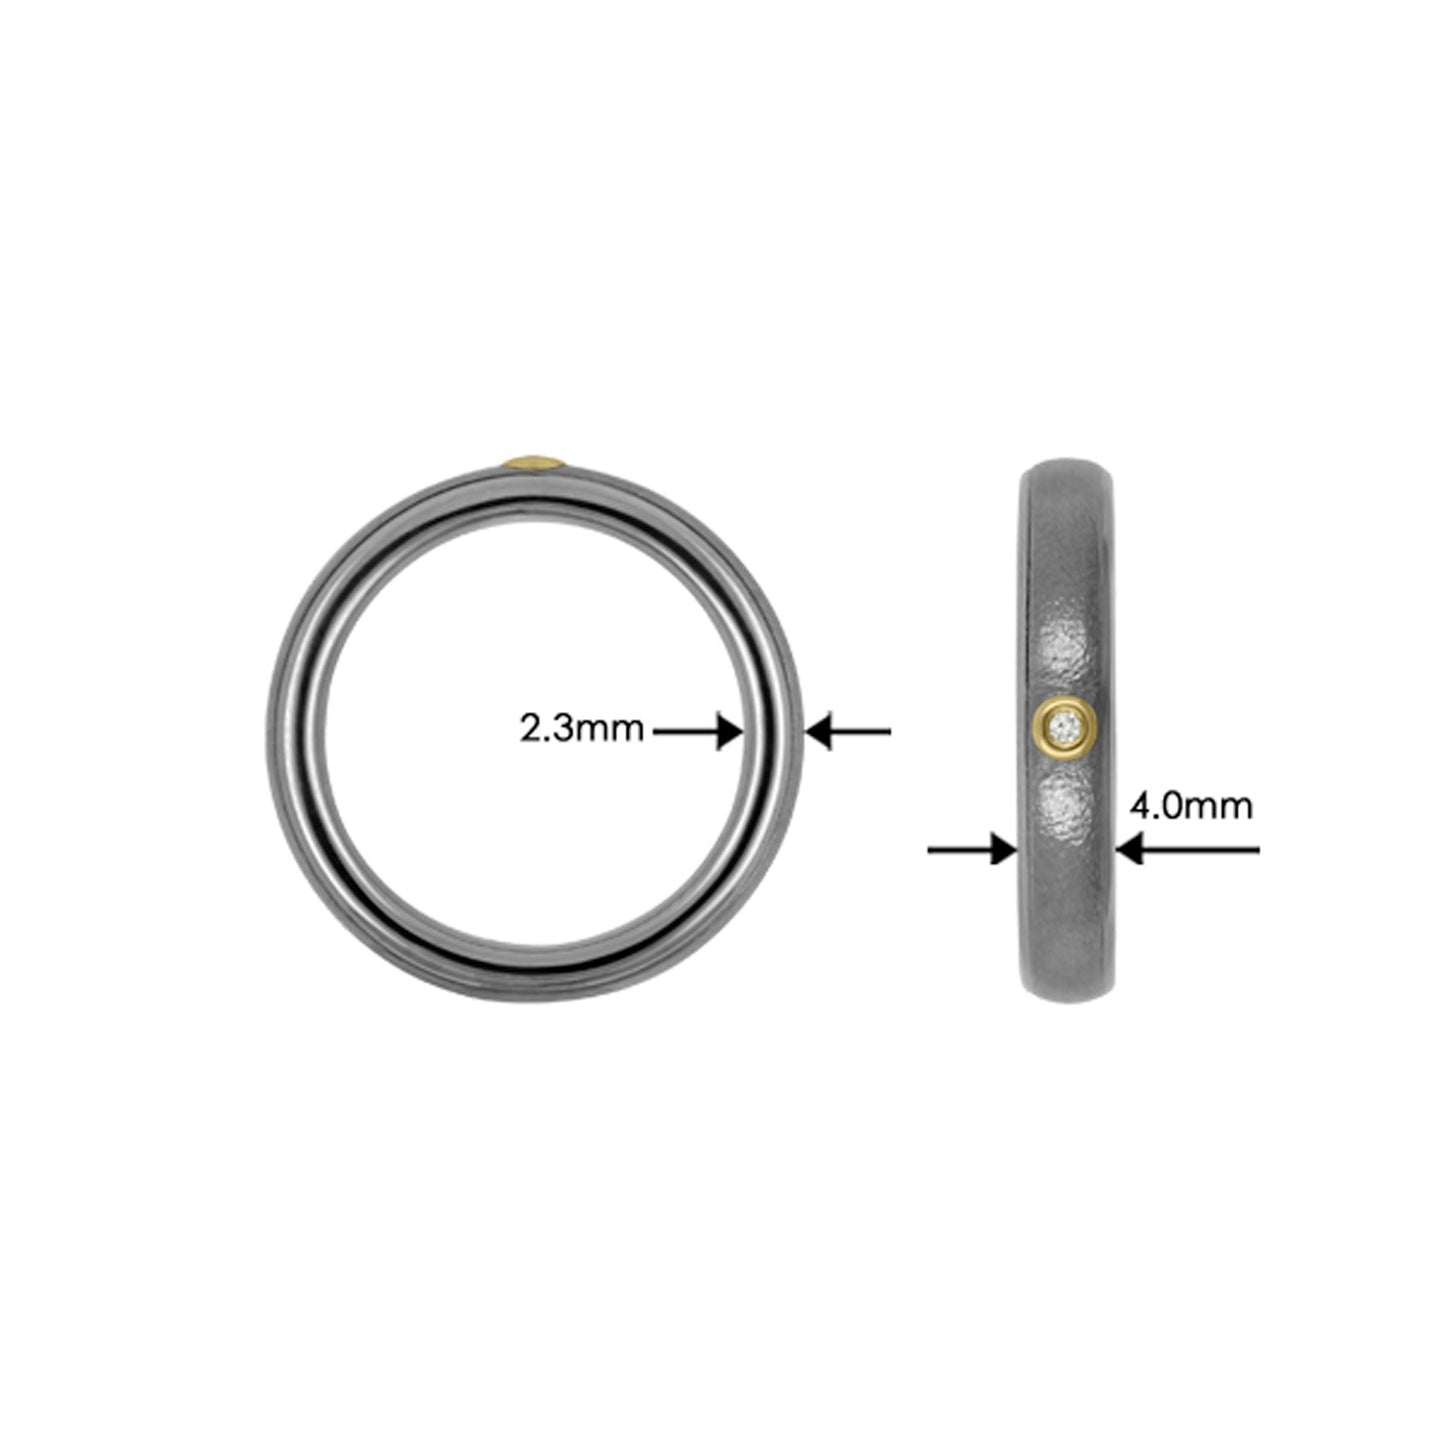 Titanium Ring with Lab Grown Diamond(1x0.01ct. White TW/Si-2), 18k Yellow Gold, & Tantalum Fine Hammered Polished. The picture shows the width (4.0mm) and hight (2.3mm)) of the ring